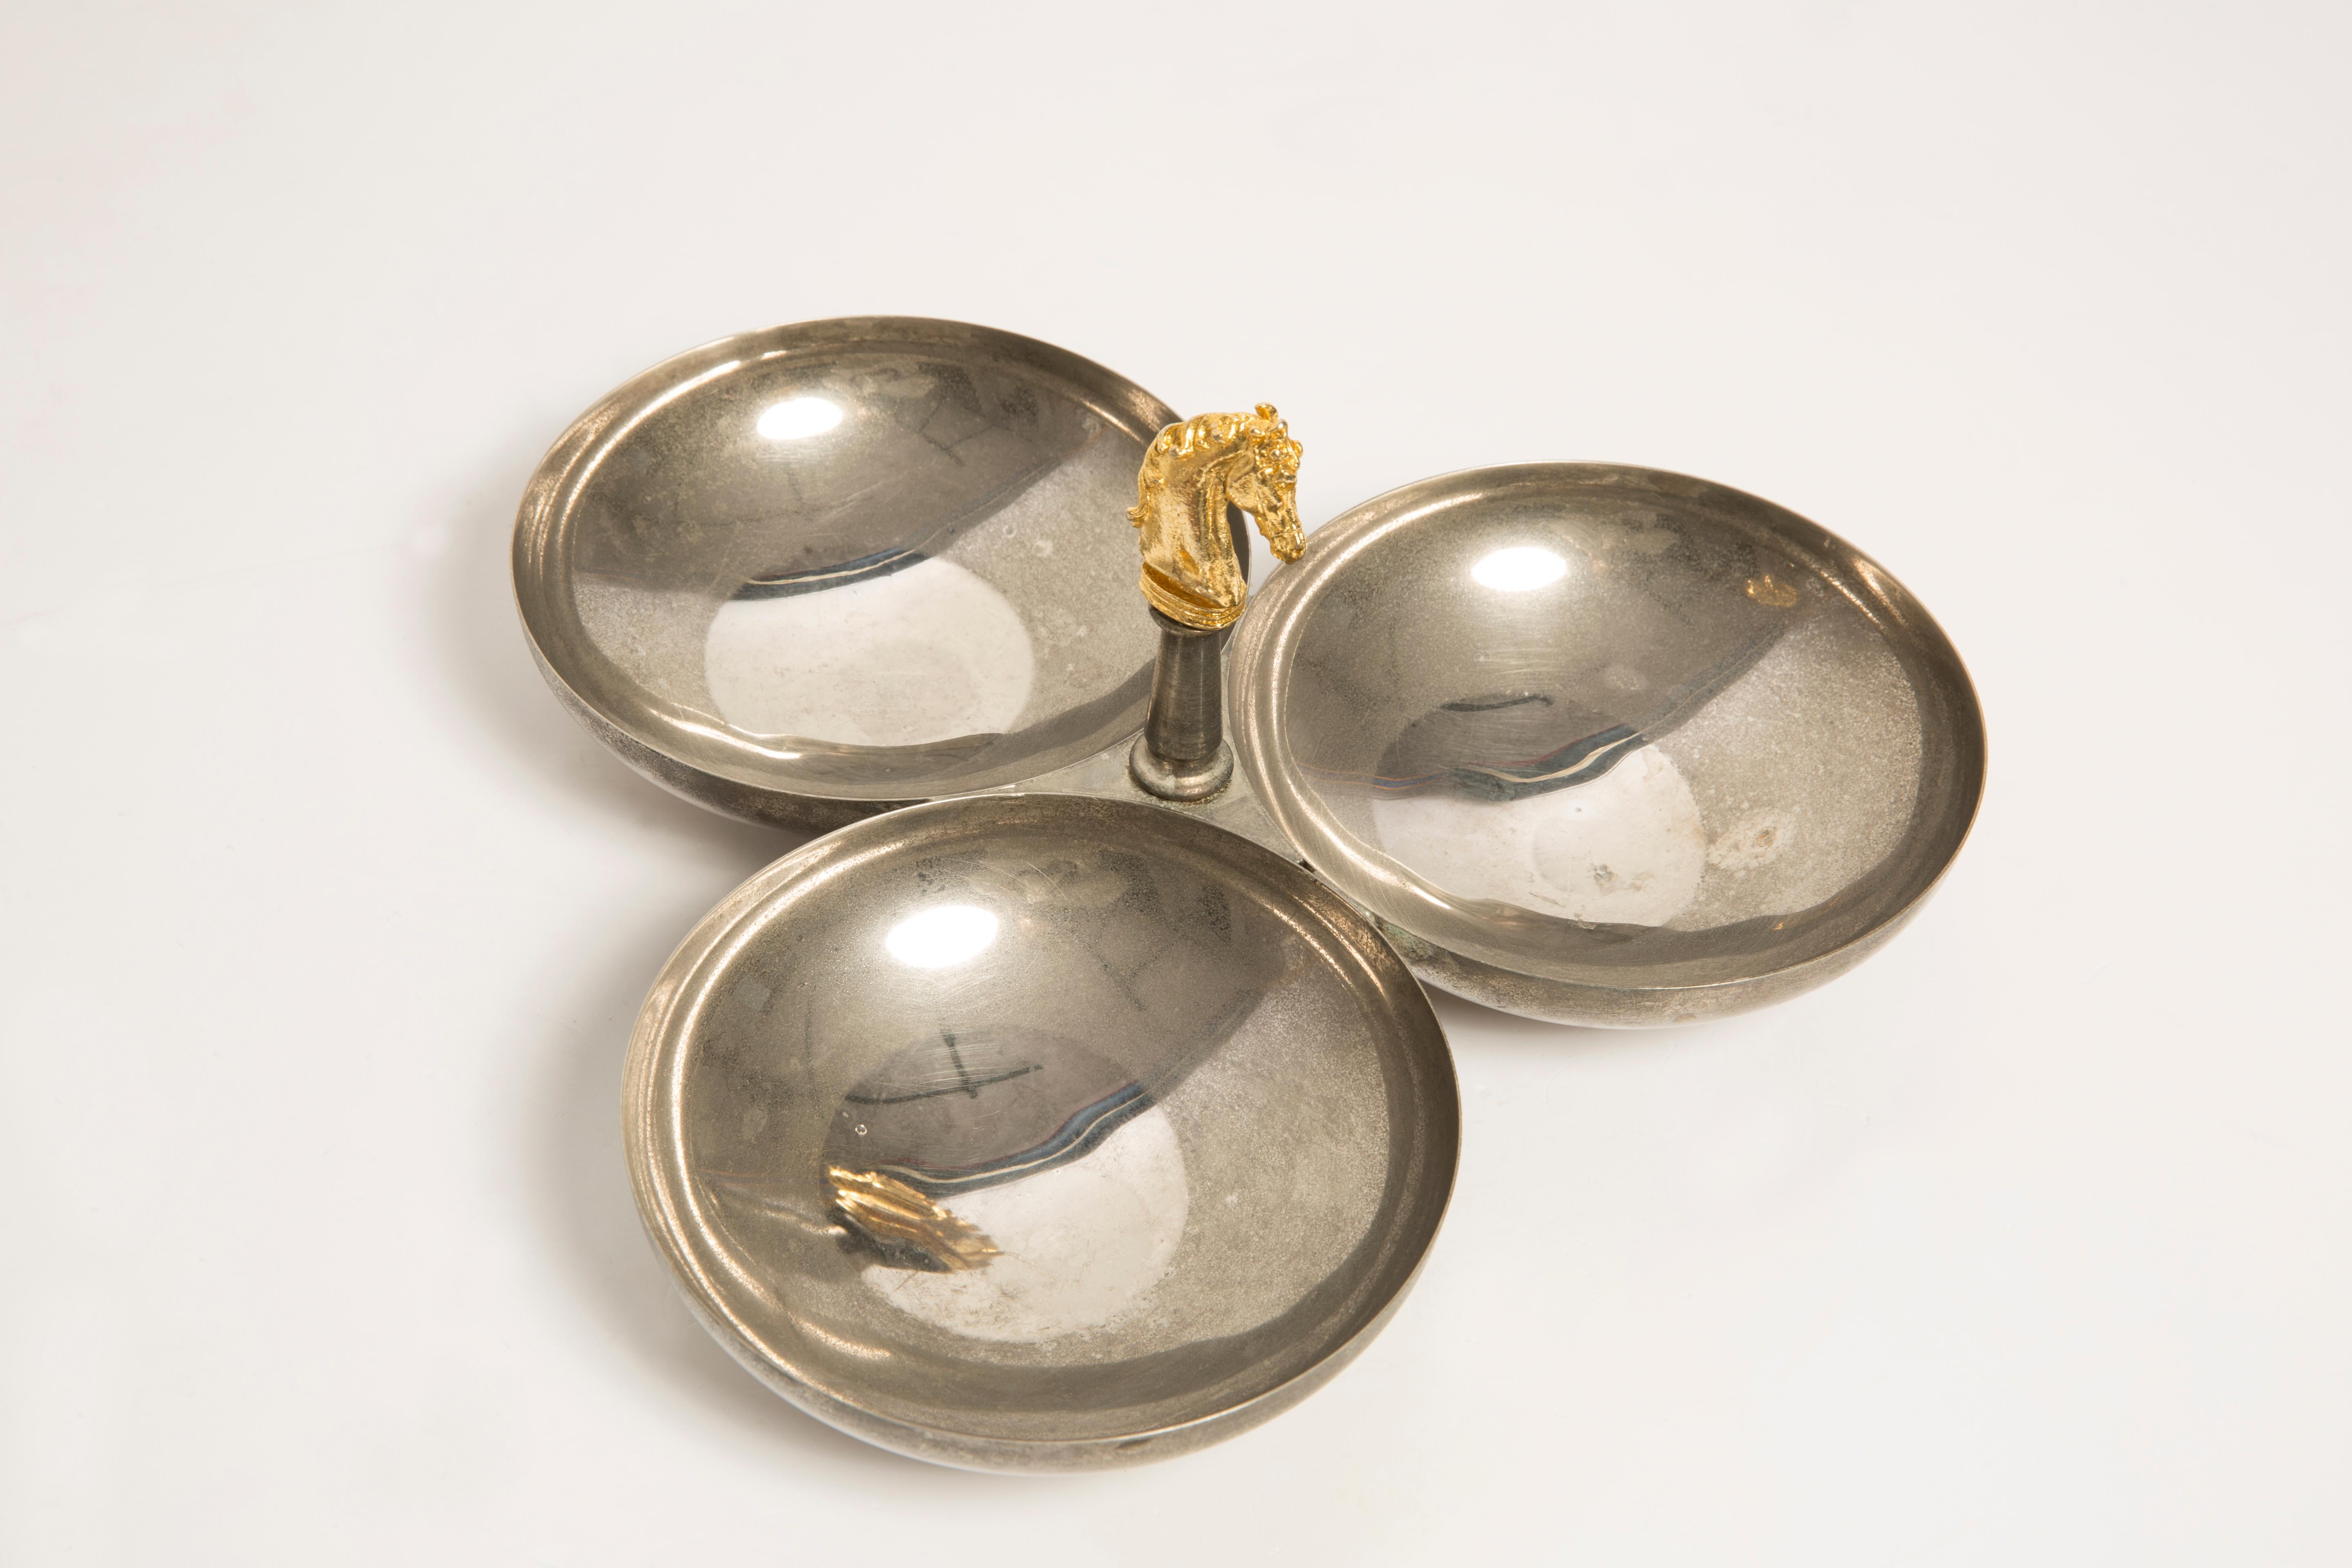 This original vintage brass ash tray bowl element was designed and produced in the 1970s in Lombardia, Italy. It is made in Sommerso Technique and has a fantastic faceted form. The unique leaf shape makes this items highly decorative. This item is a